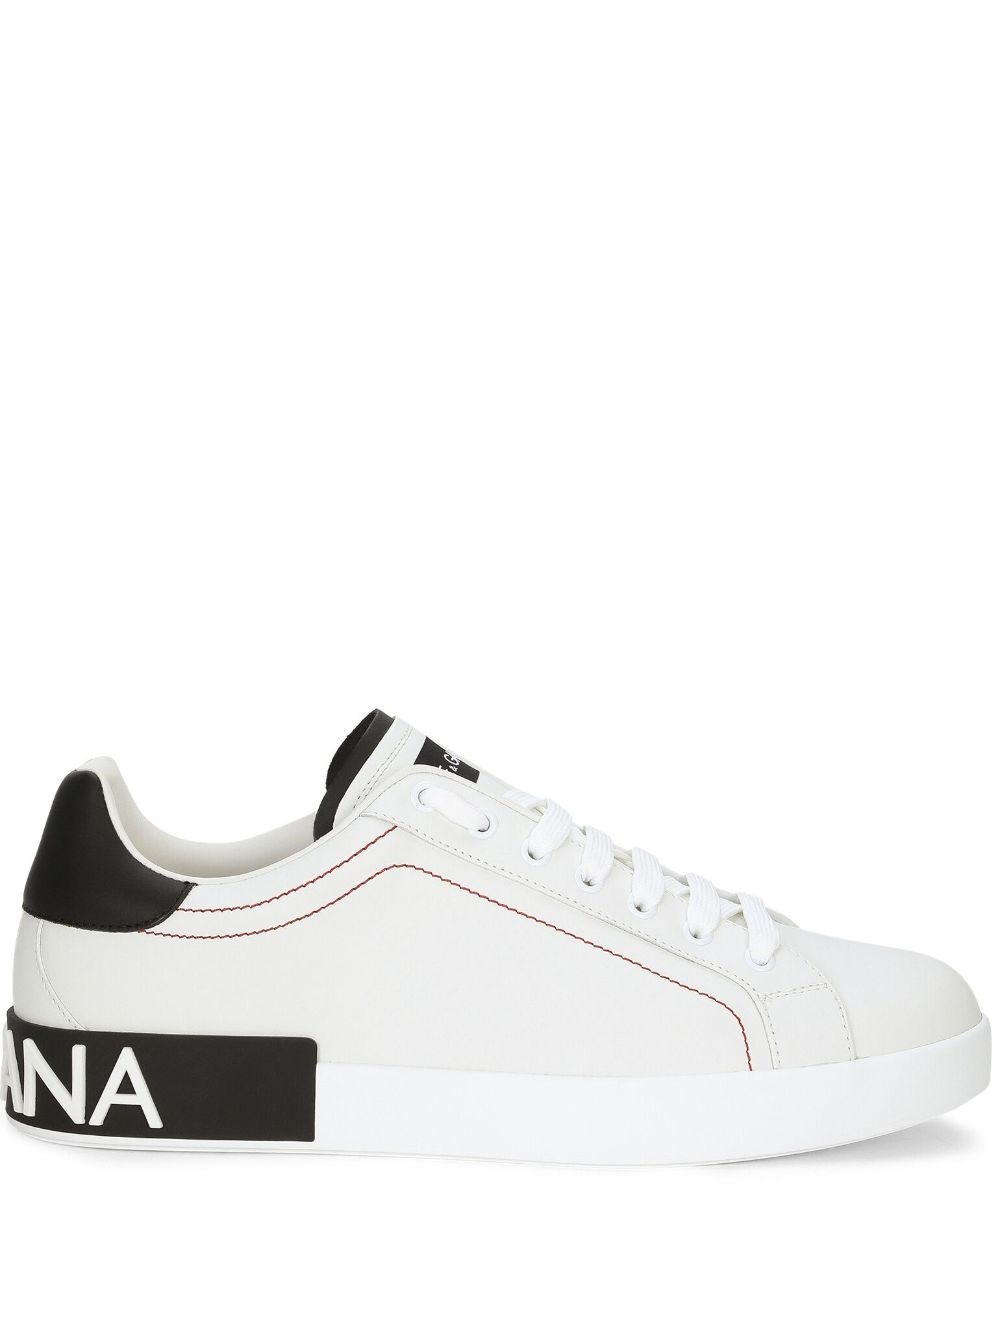 dolce & gabbana SNEAKERS available on montiboutique.com - 55154